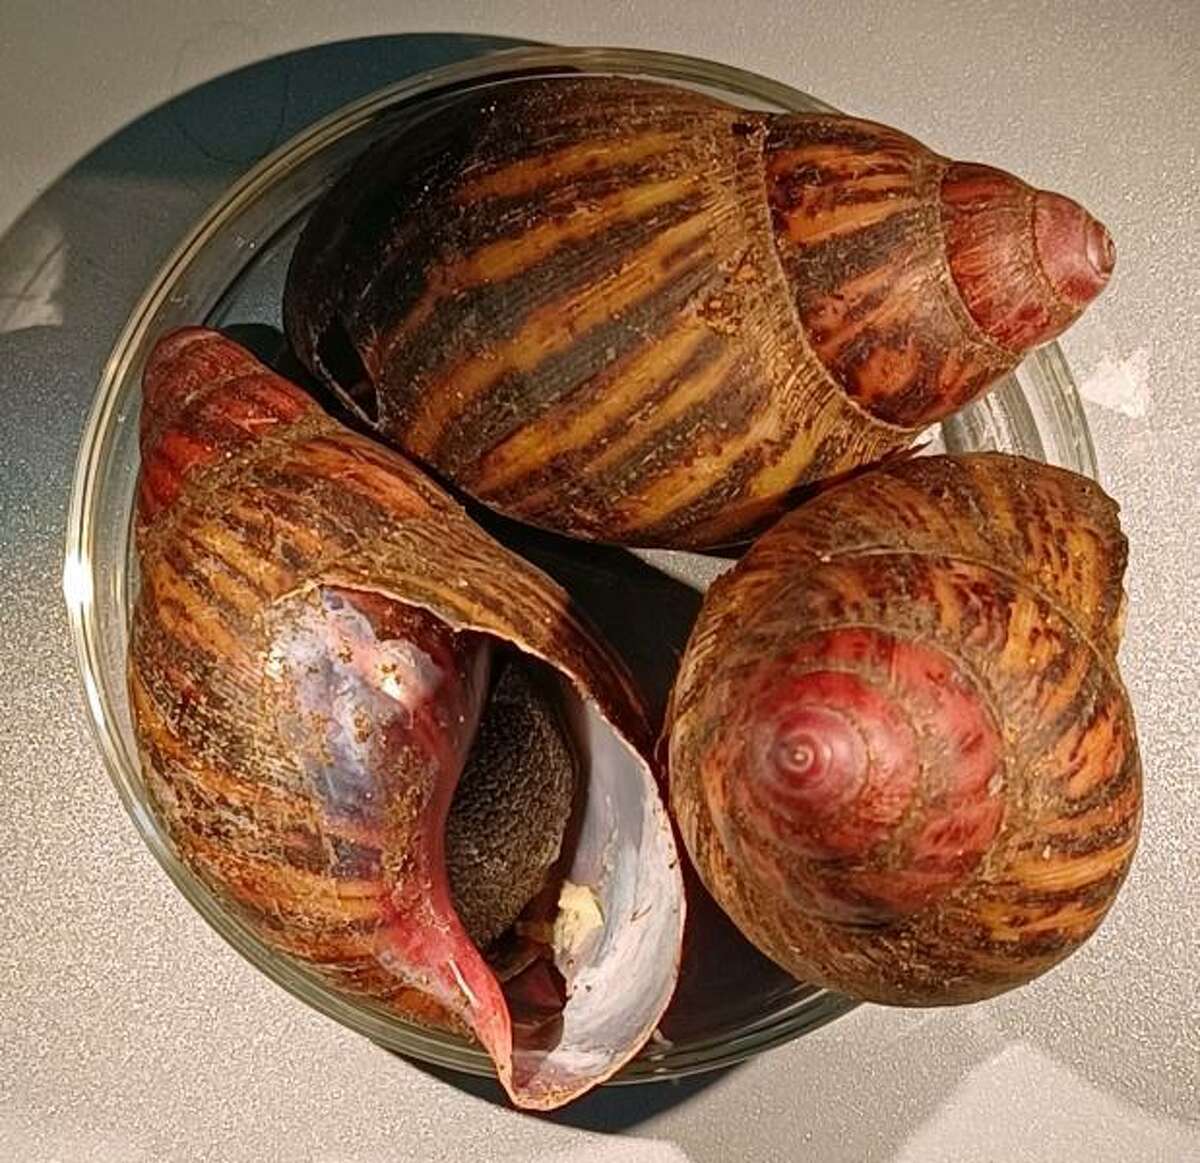 These snails were seized from a passenger's luggage at IAH in July. 